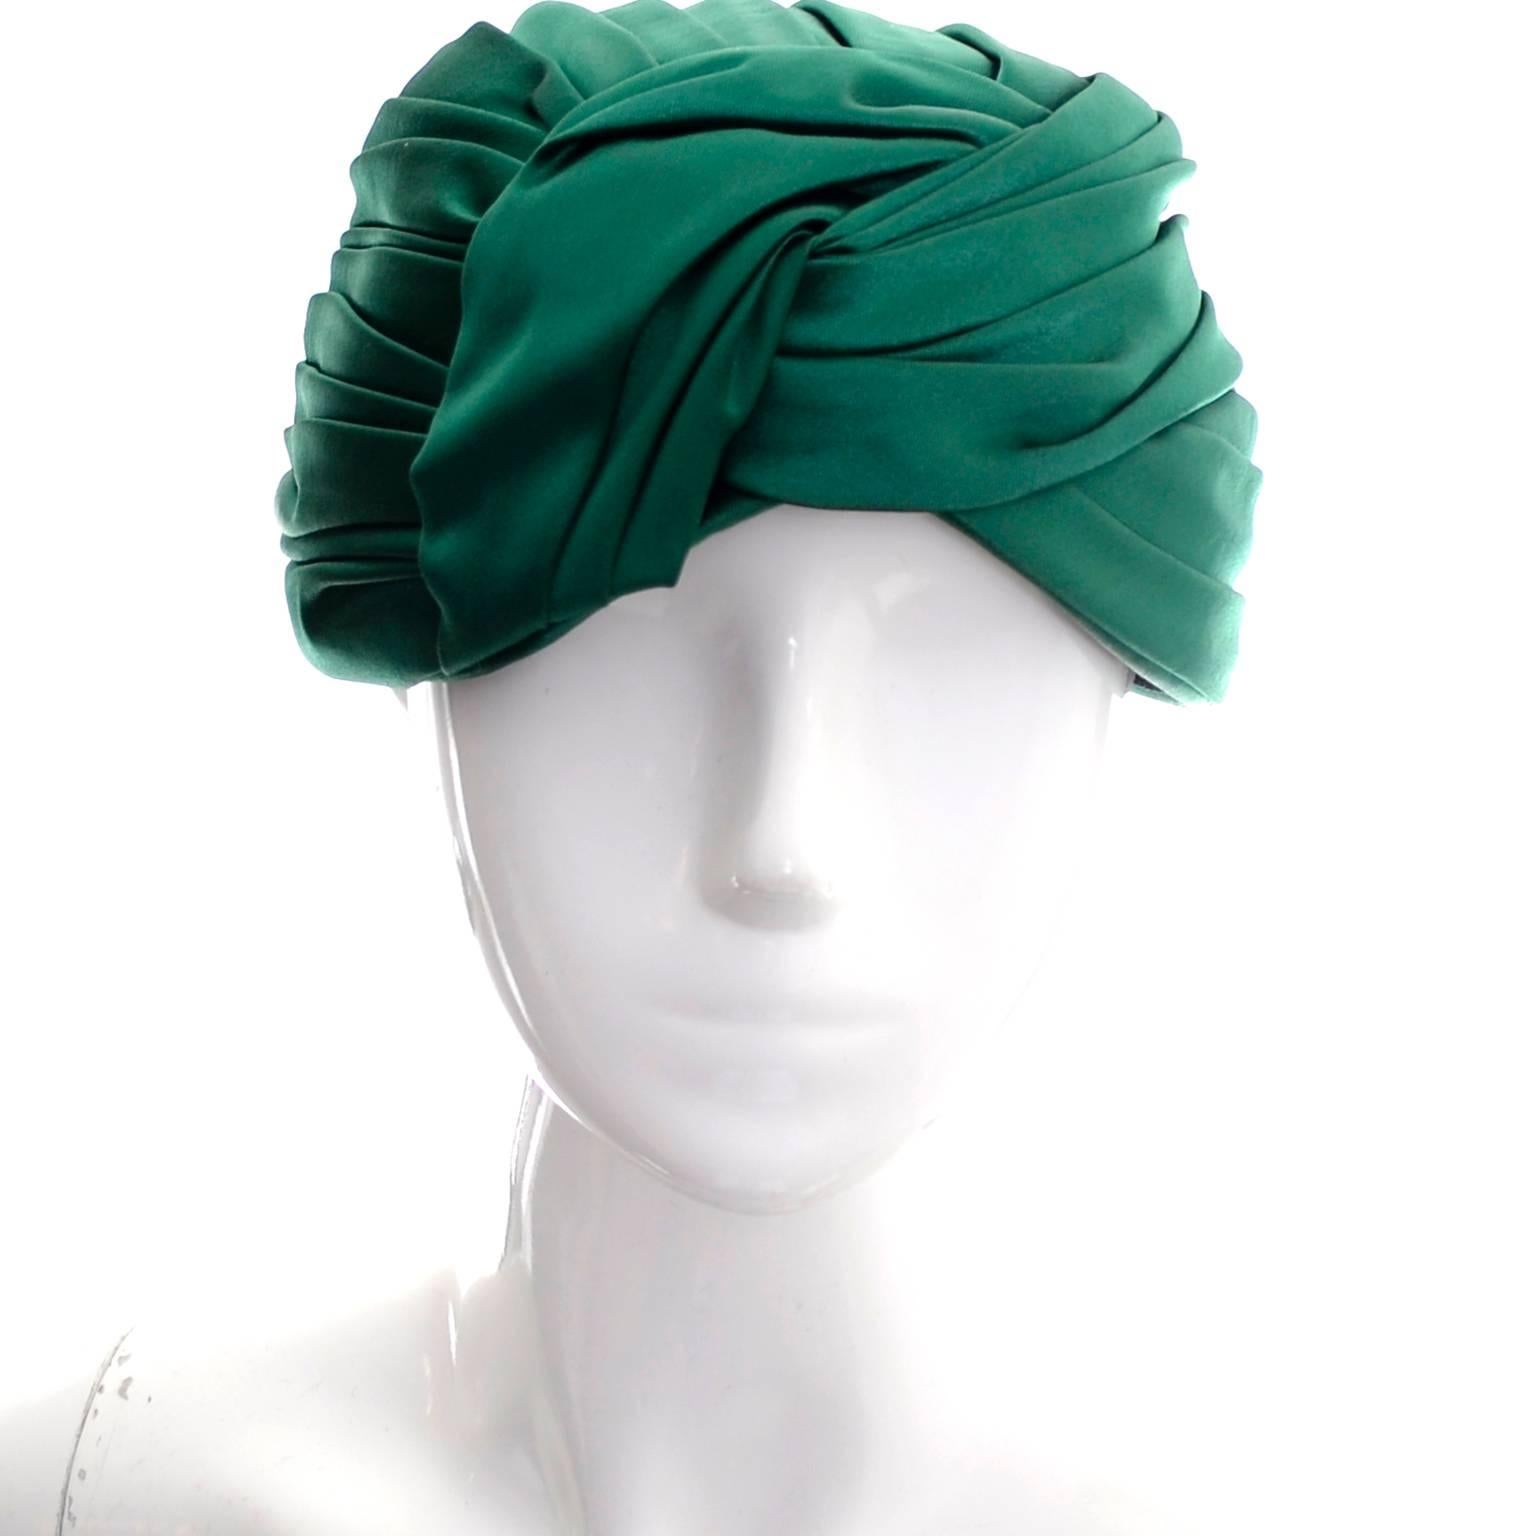 This lovely vintage hat was created in the 1960's but it is in as new condition.  The beautiful green satin is perfectly pleated and the hat almost resembles a turban when worn.  This hat has the Miss Dior Created by Christian Dior label and is